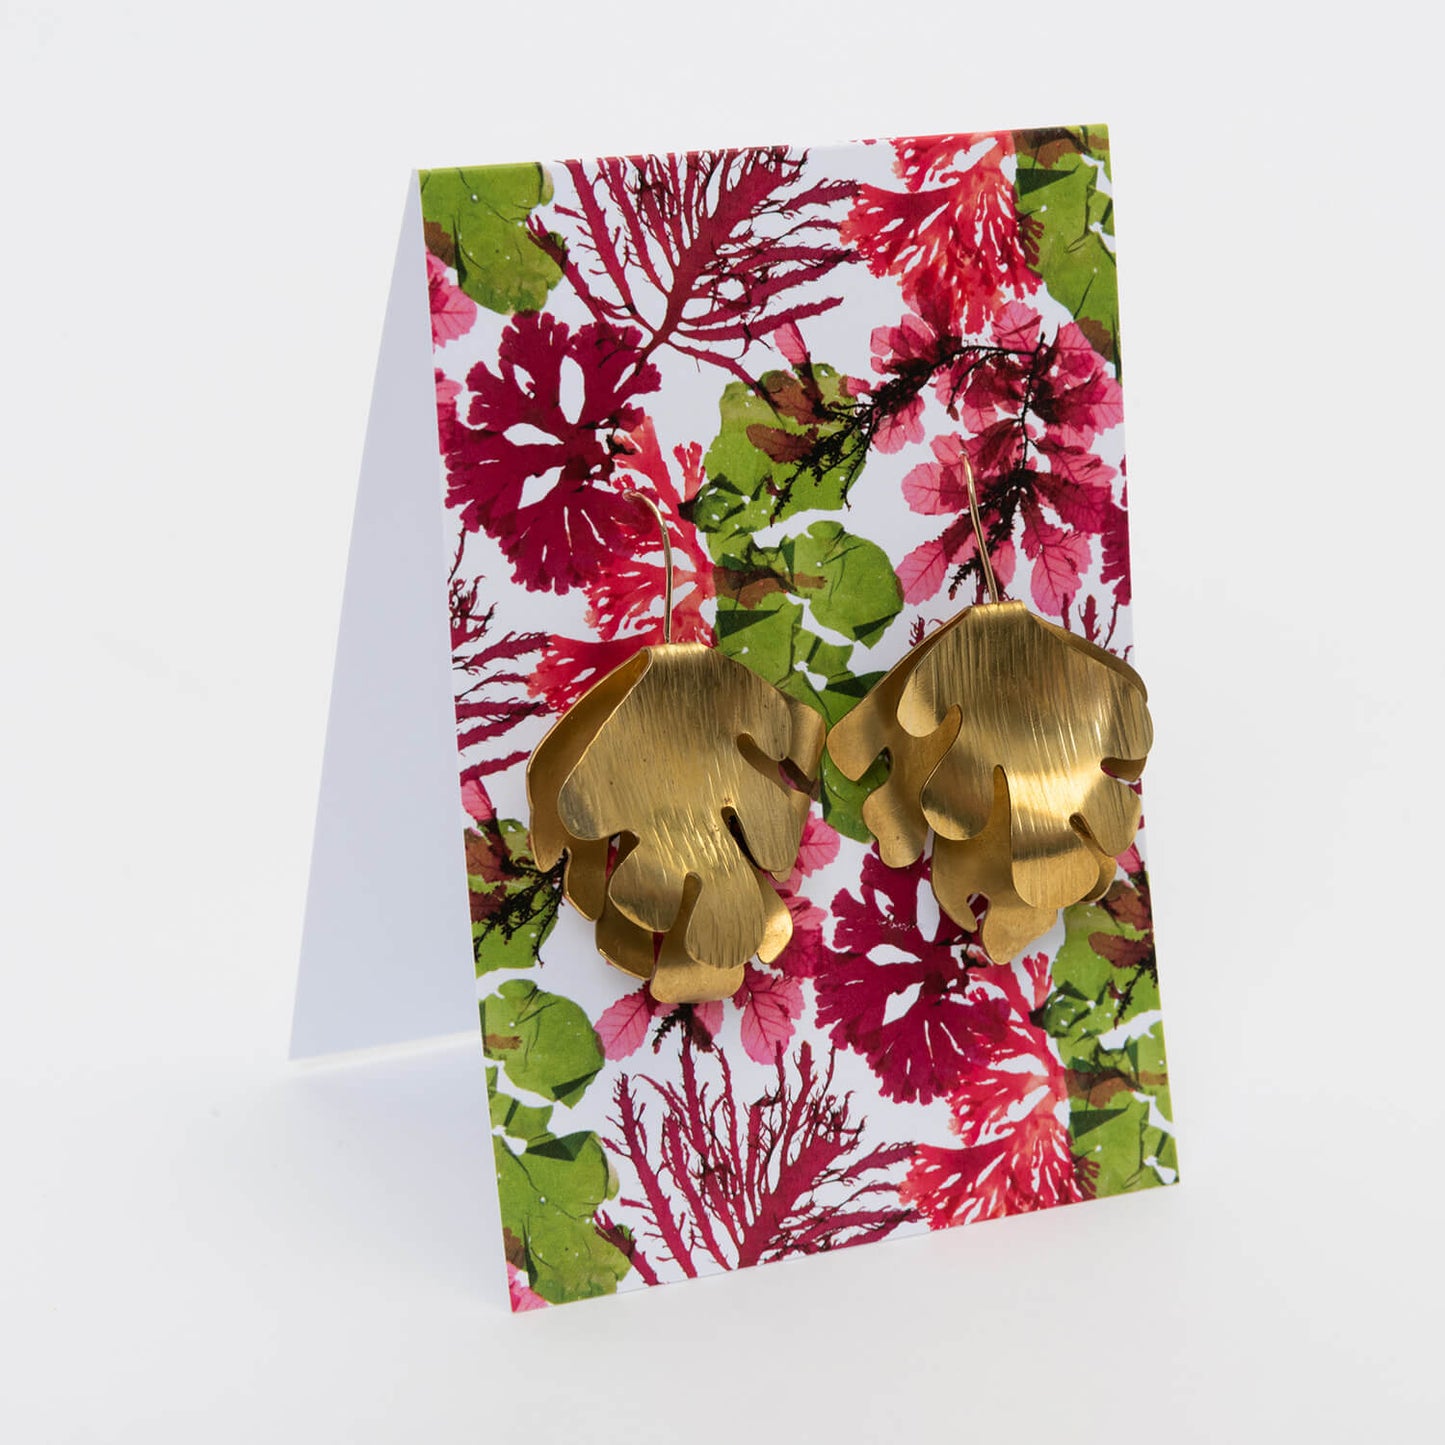 Colourful packaging for the brass seaweed wave earrings